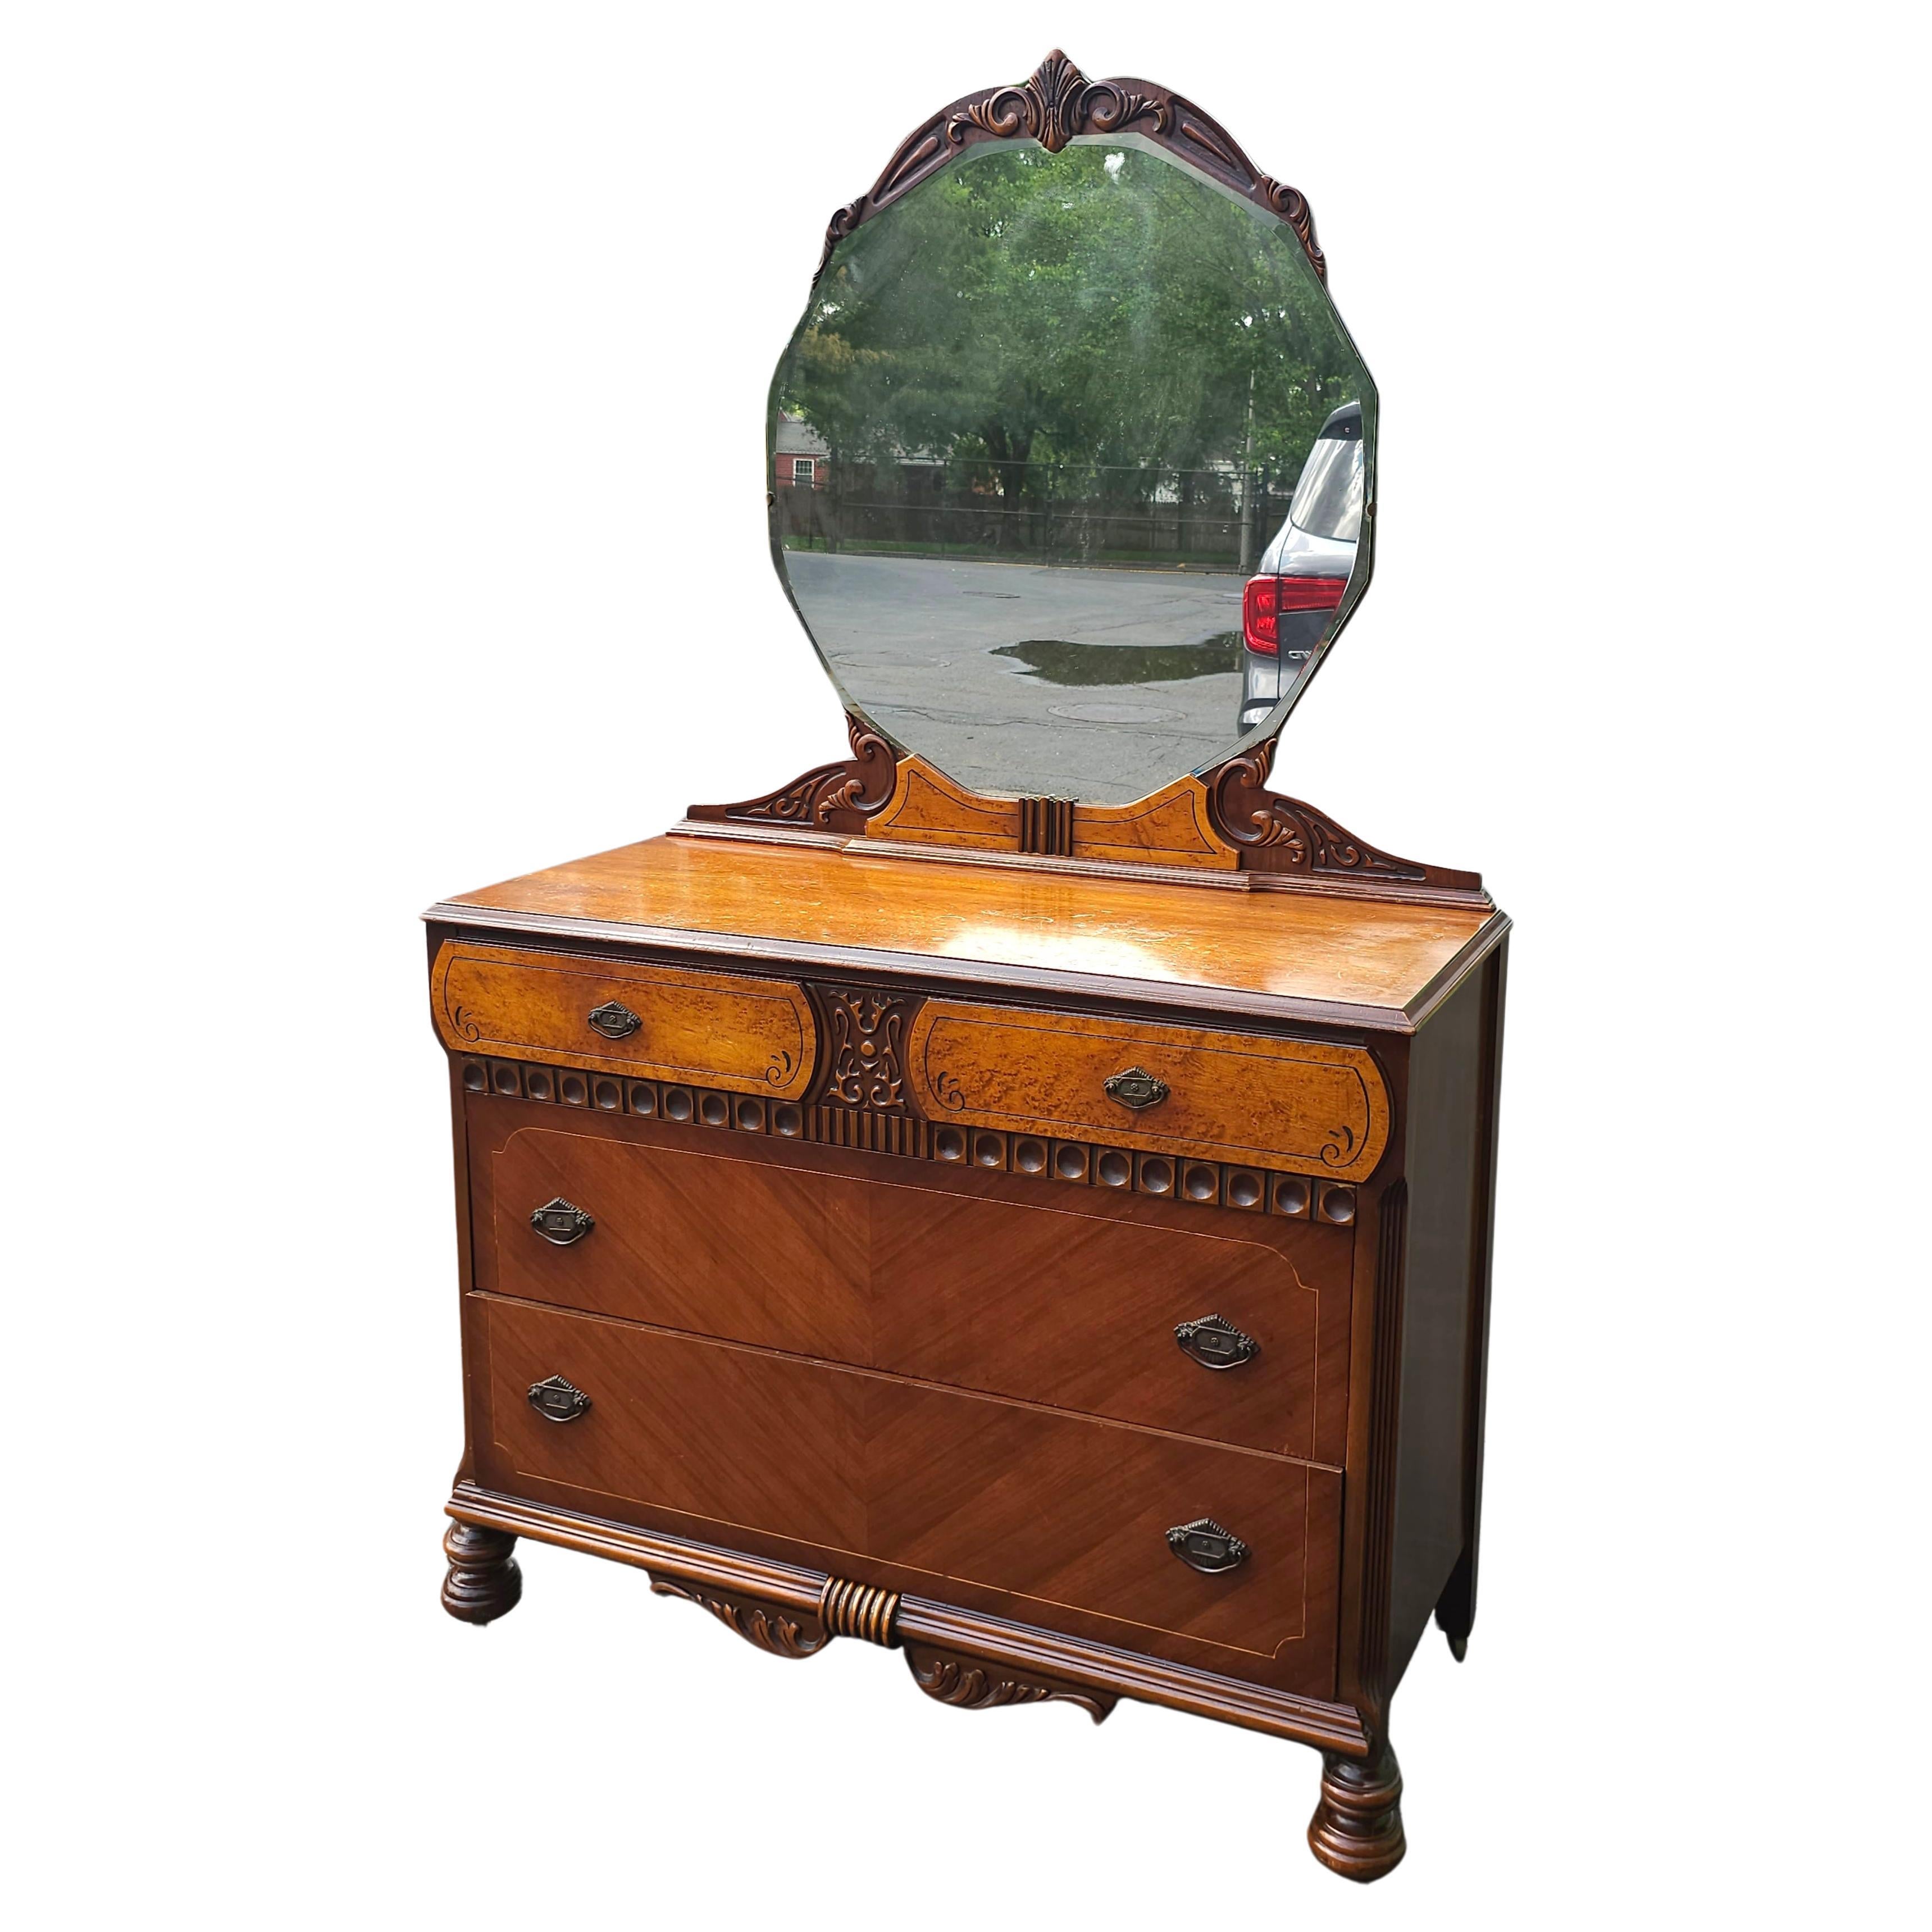 An Early 20th Century Art Deco Chest Mahogany and Walnut 4 drawer Chest of Drawers with Mirror on original wooden wheels under William and Mary style legs. Use with or without mounted mirror. Measures 44